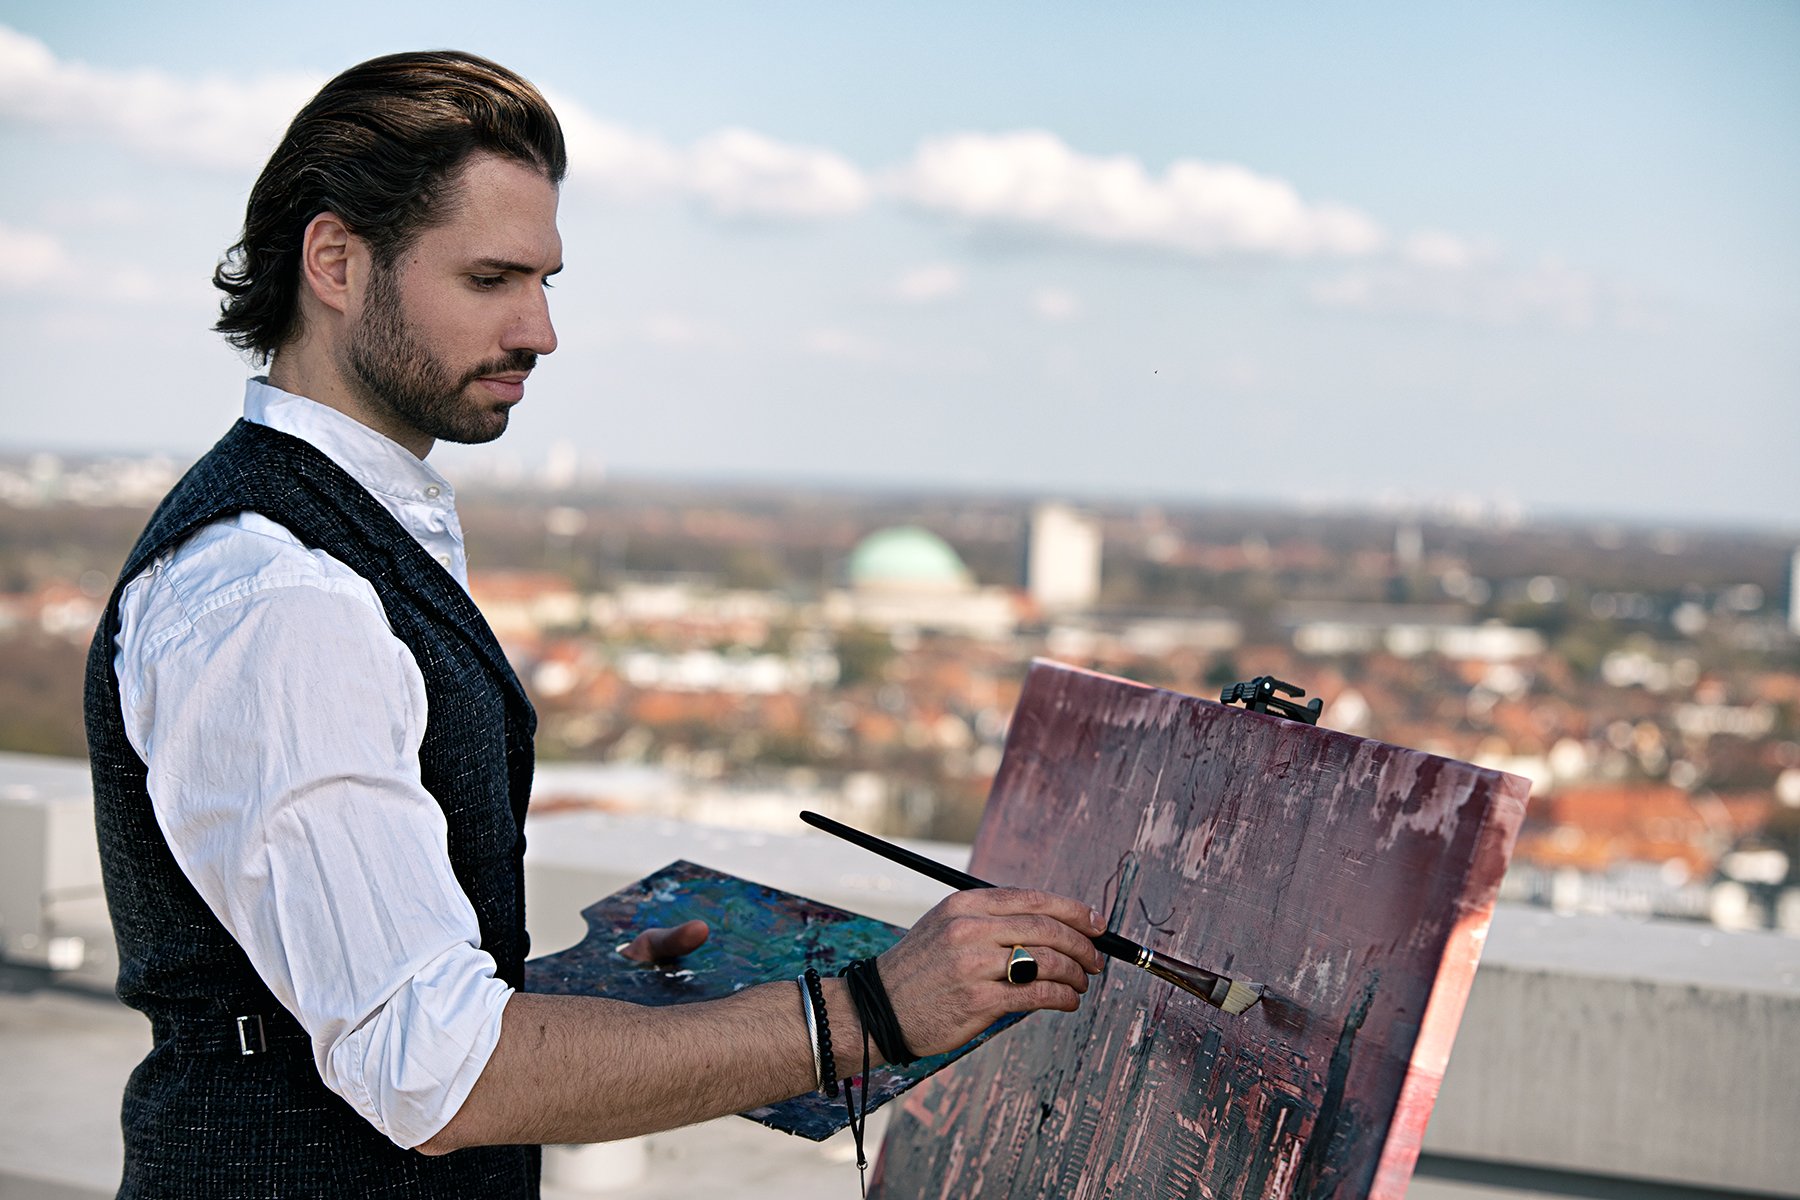 Painting on a rooftop 5.jpg